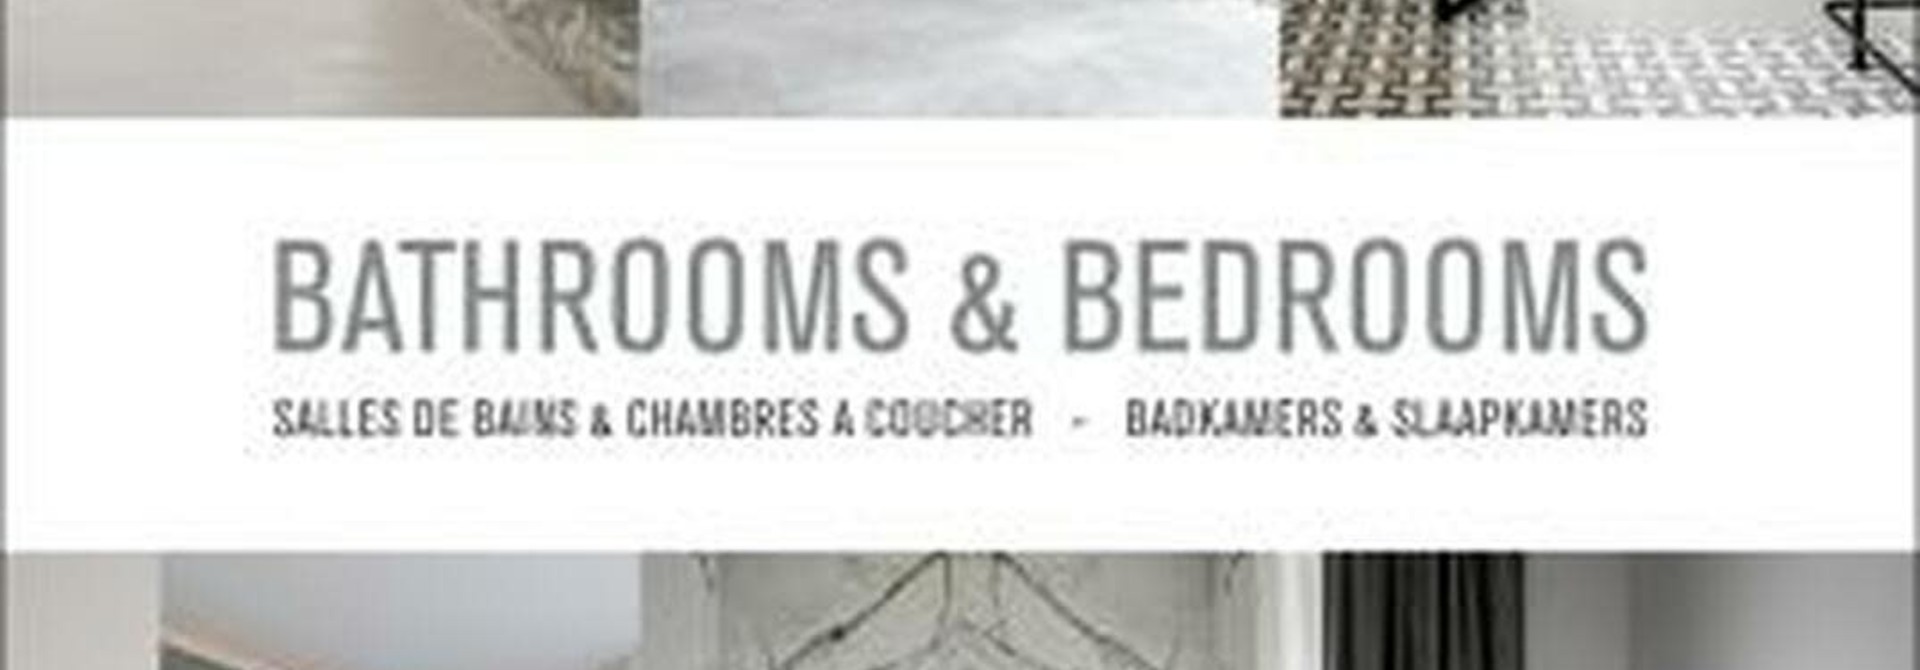 Bathrooms & Bedrooms | The Design Collection